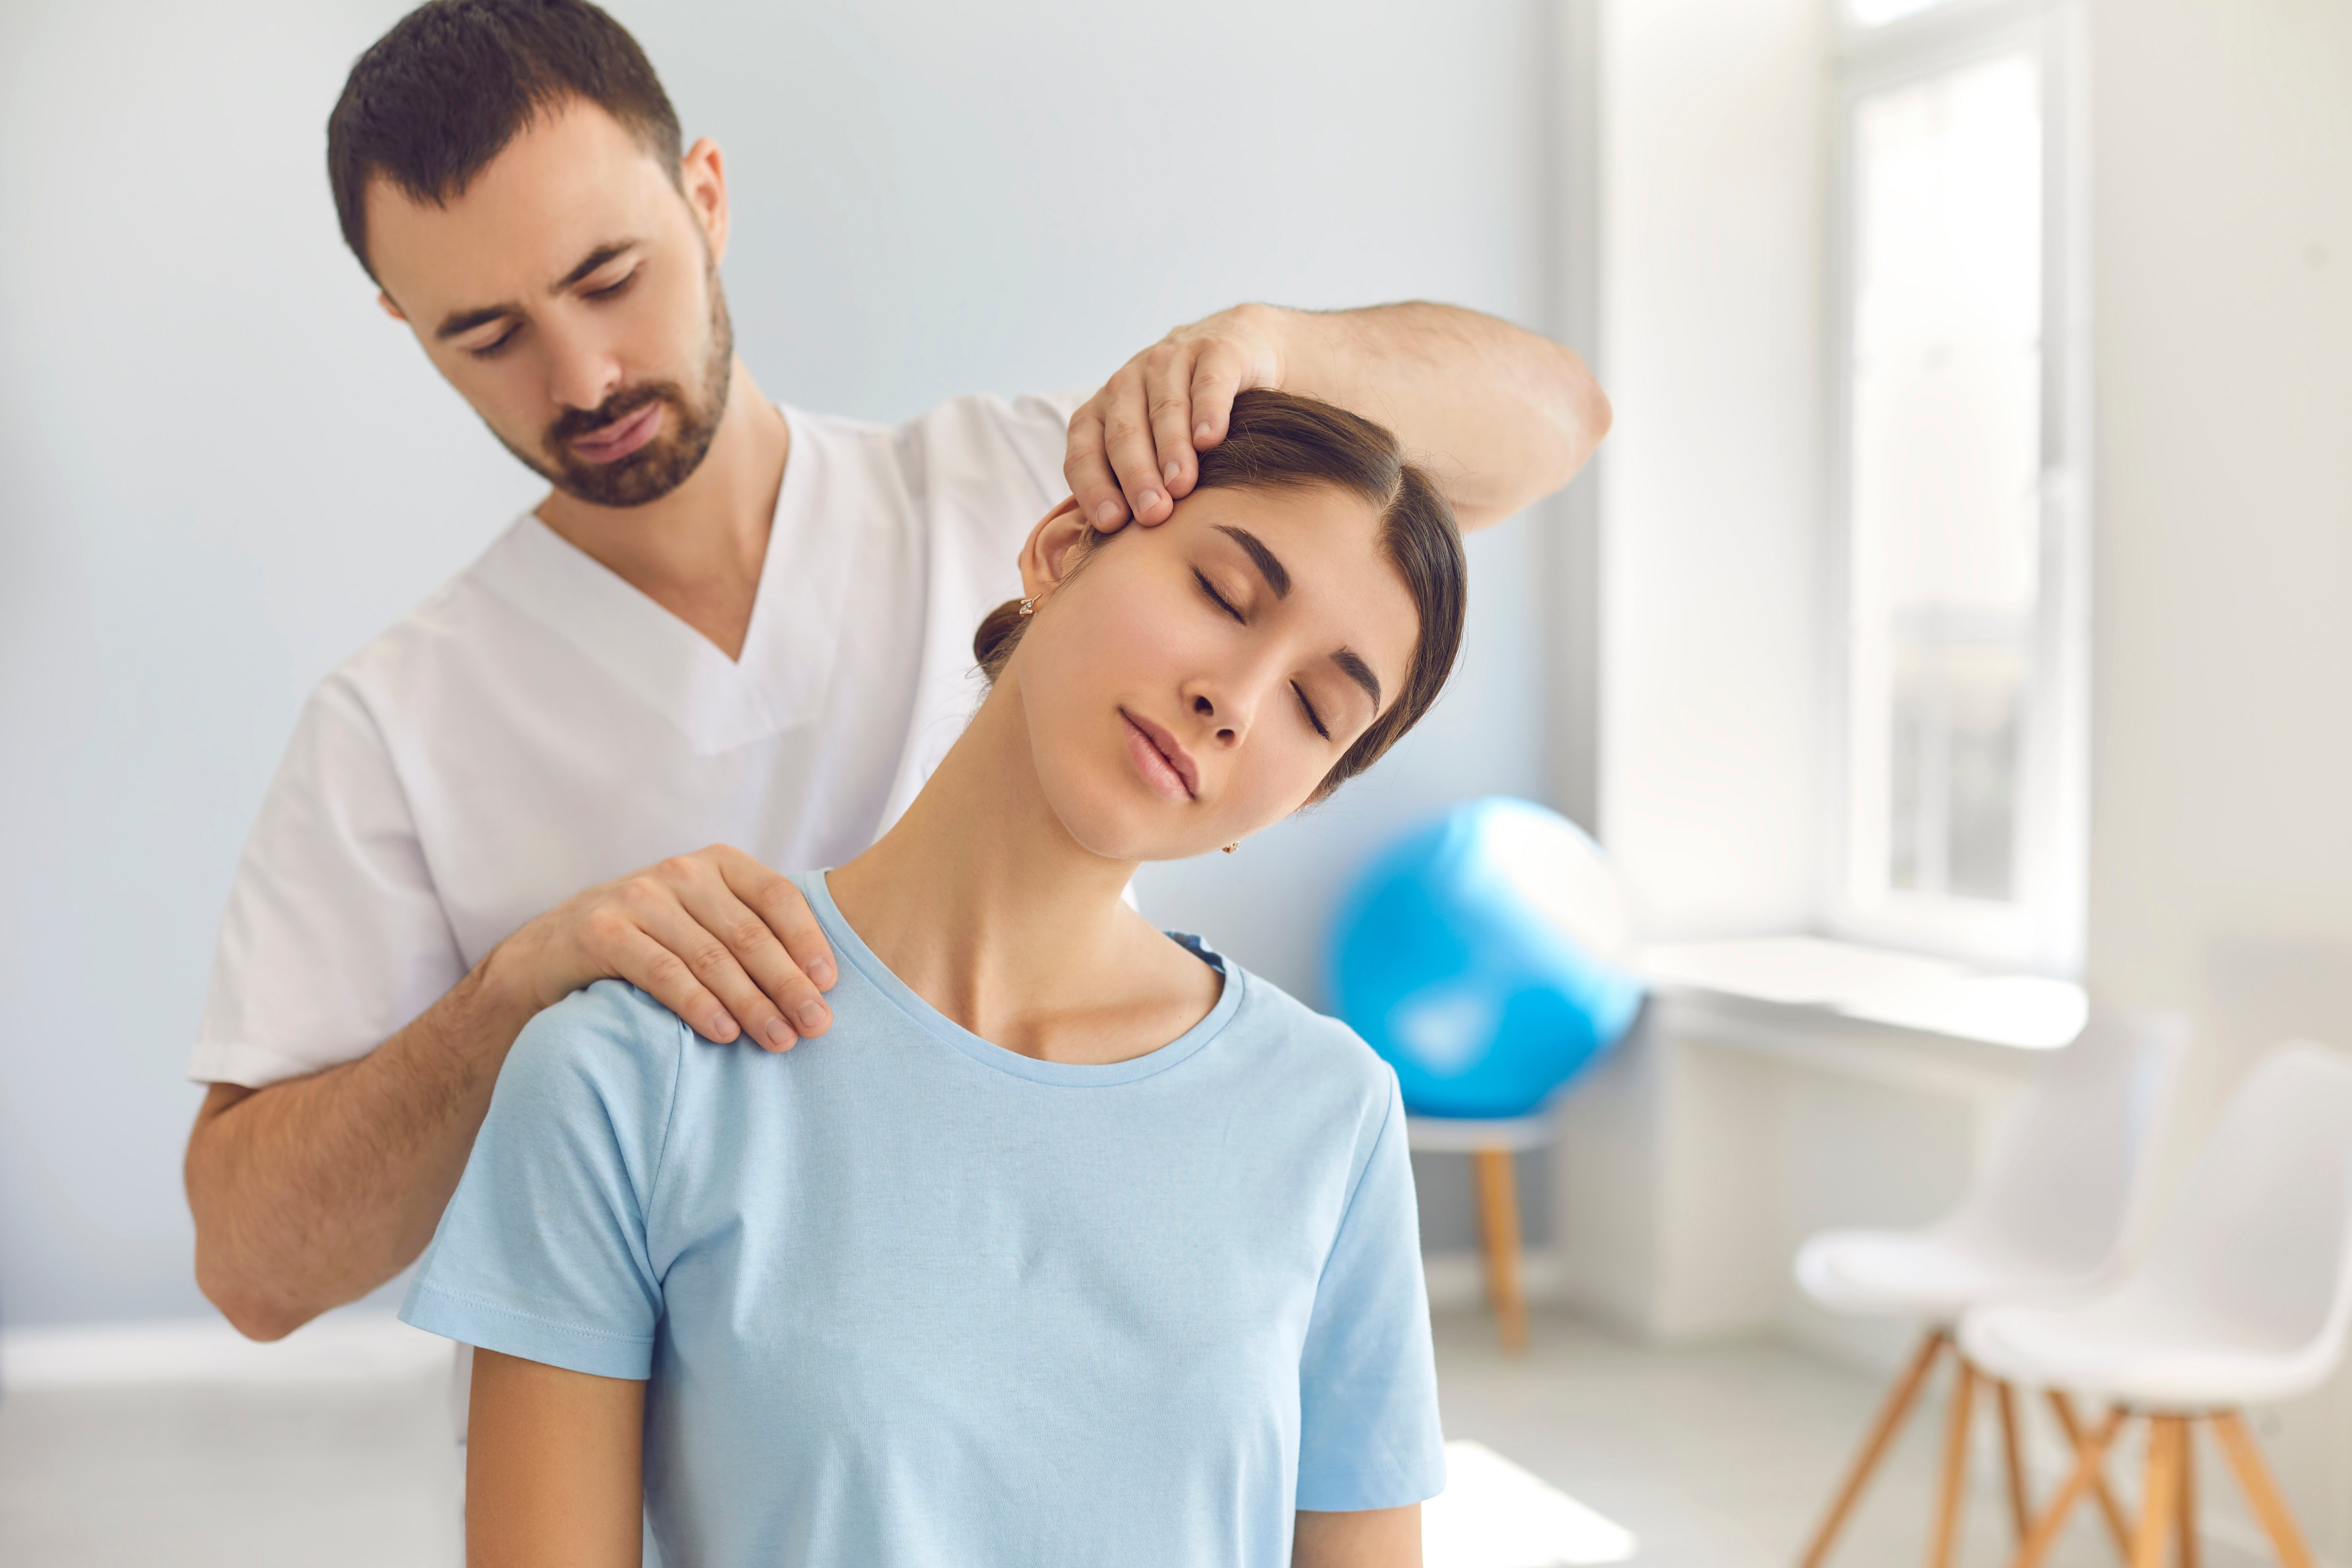 What Does a Chiropractic Adjustment Do for My Body?